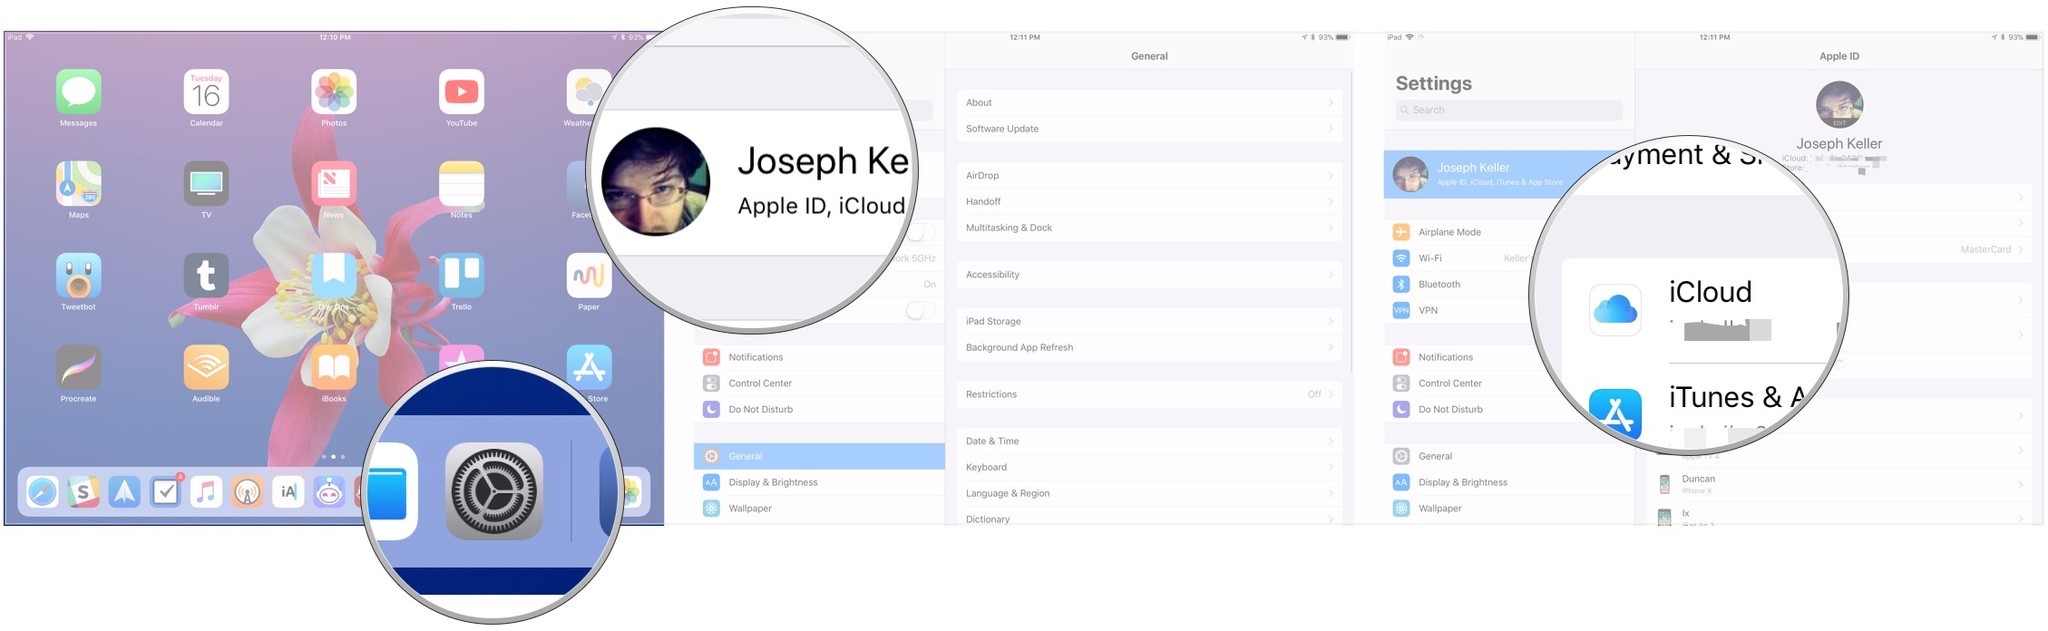 Transfer data by using iCloud to backup by showing steps: Open Settings, tap Apple ID banner, tap iCloud